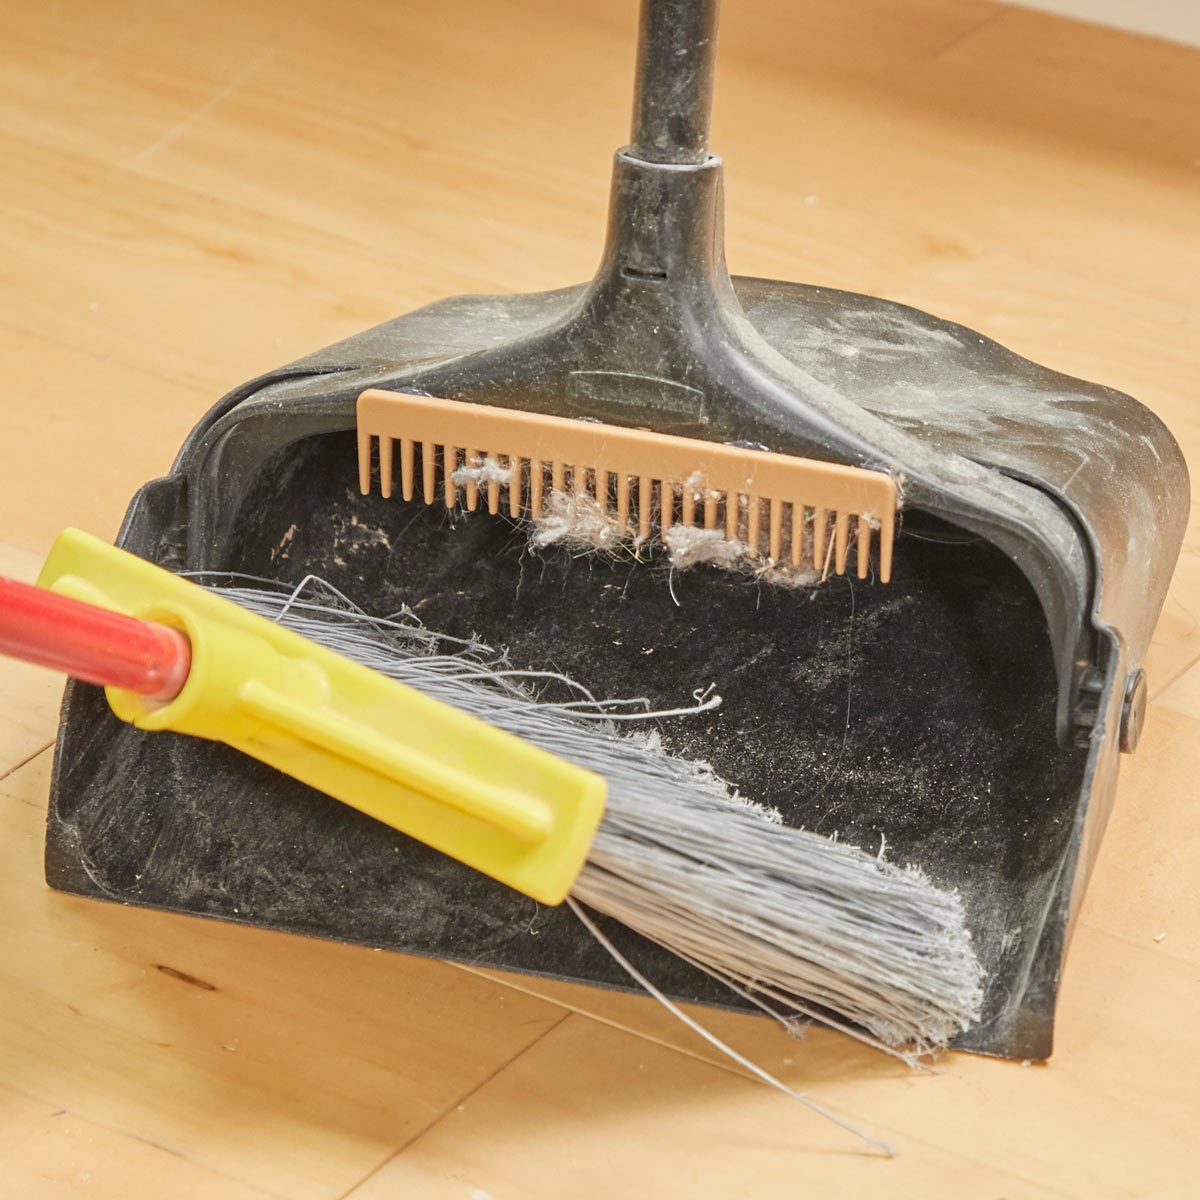 15 Simple Ways to Clean Your Cleaning Tools